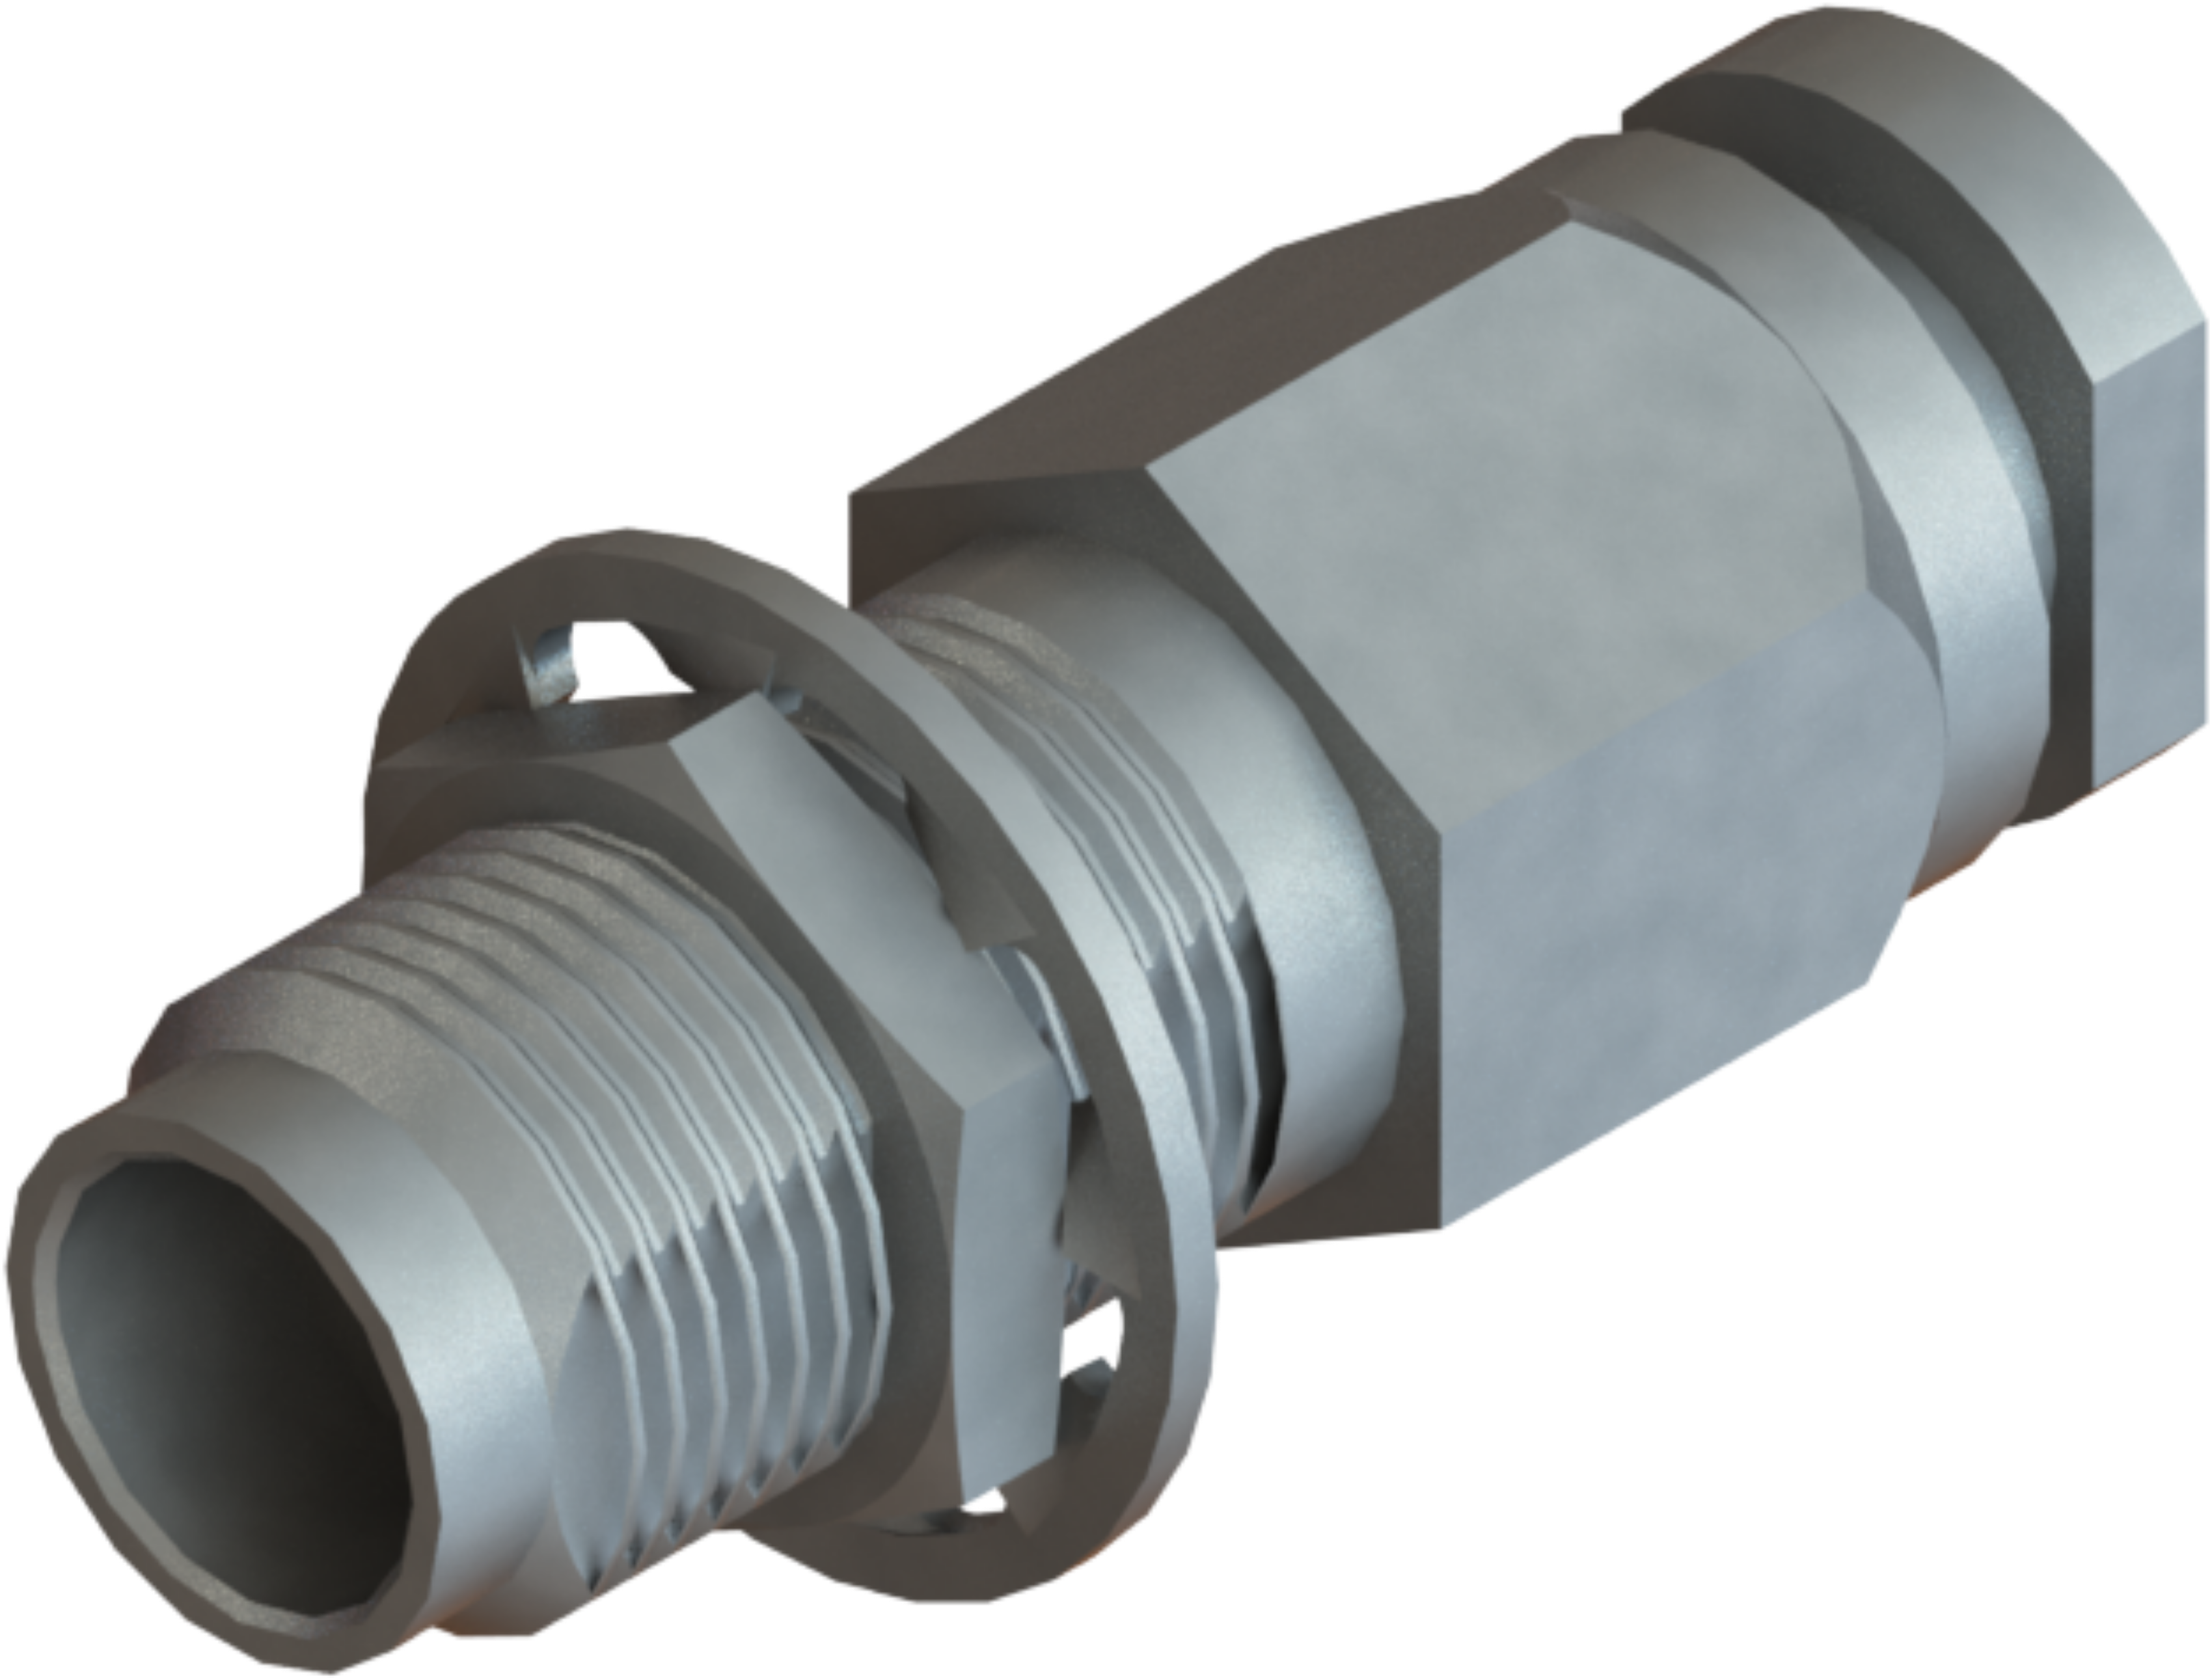 Picture of 1.85mm Female Bulkhead Connector for .047 Cable